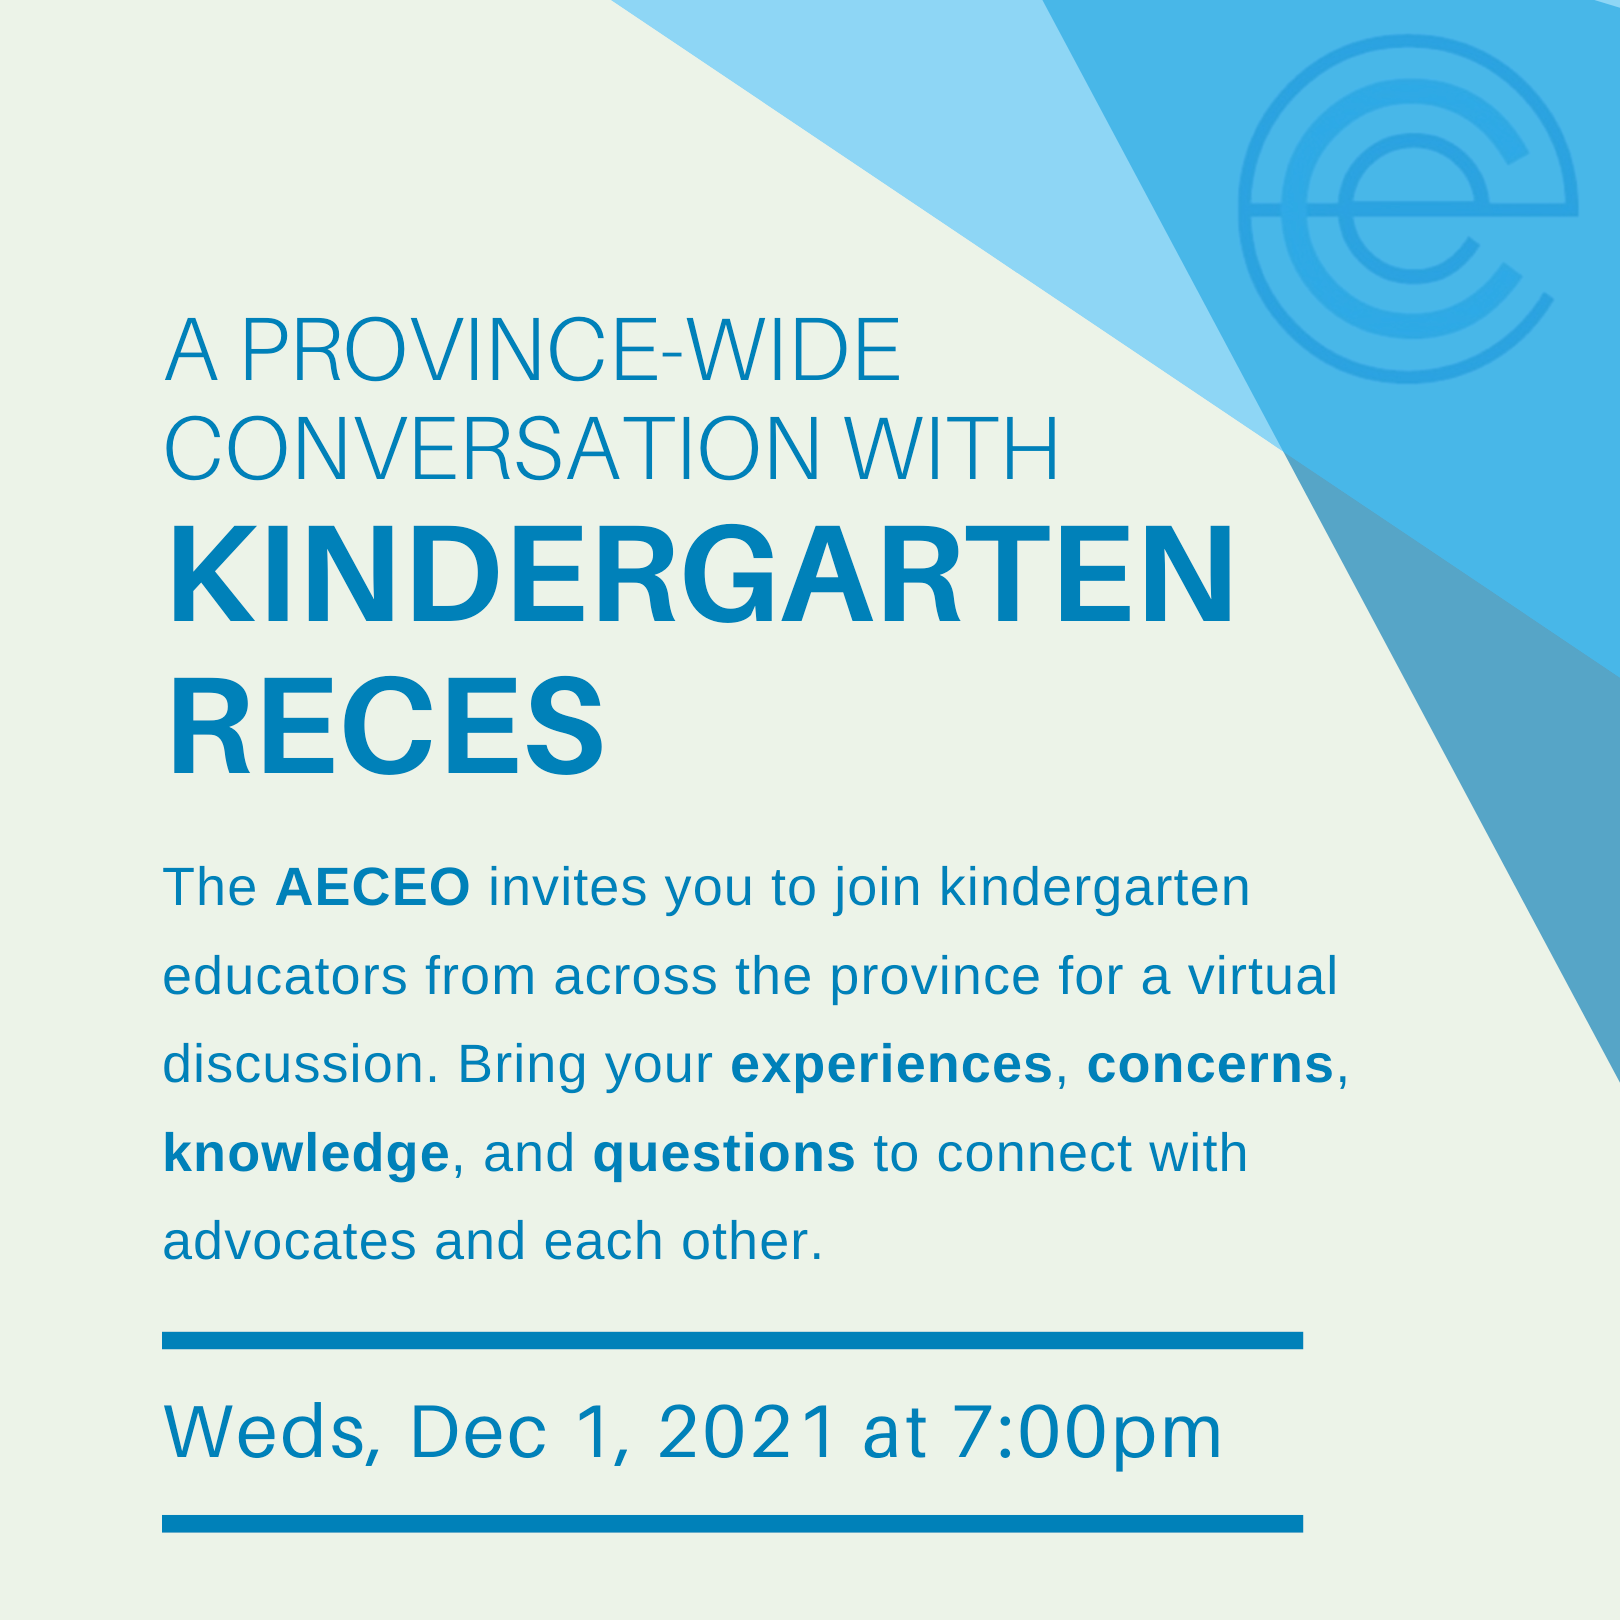 A province wide conversation with Kindergarten RECEs. The AECEO invites you to join kindergarten educators from across the province for a virtual discussion. Bring your experiences, concerns, knowledge, and questions to connect with advocates and each other. Weds, Dec 1, 2021 at 7:00pm